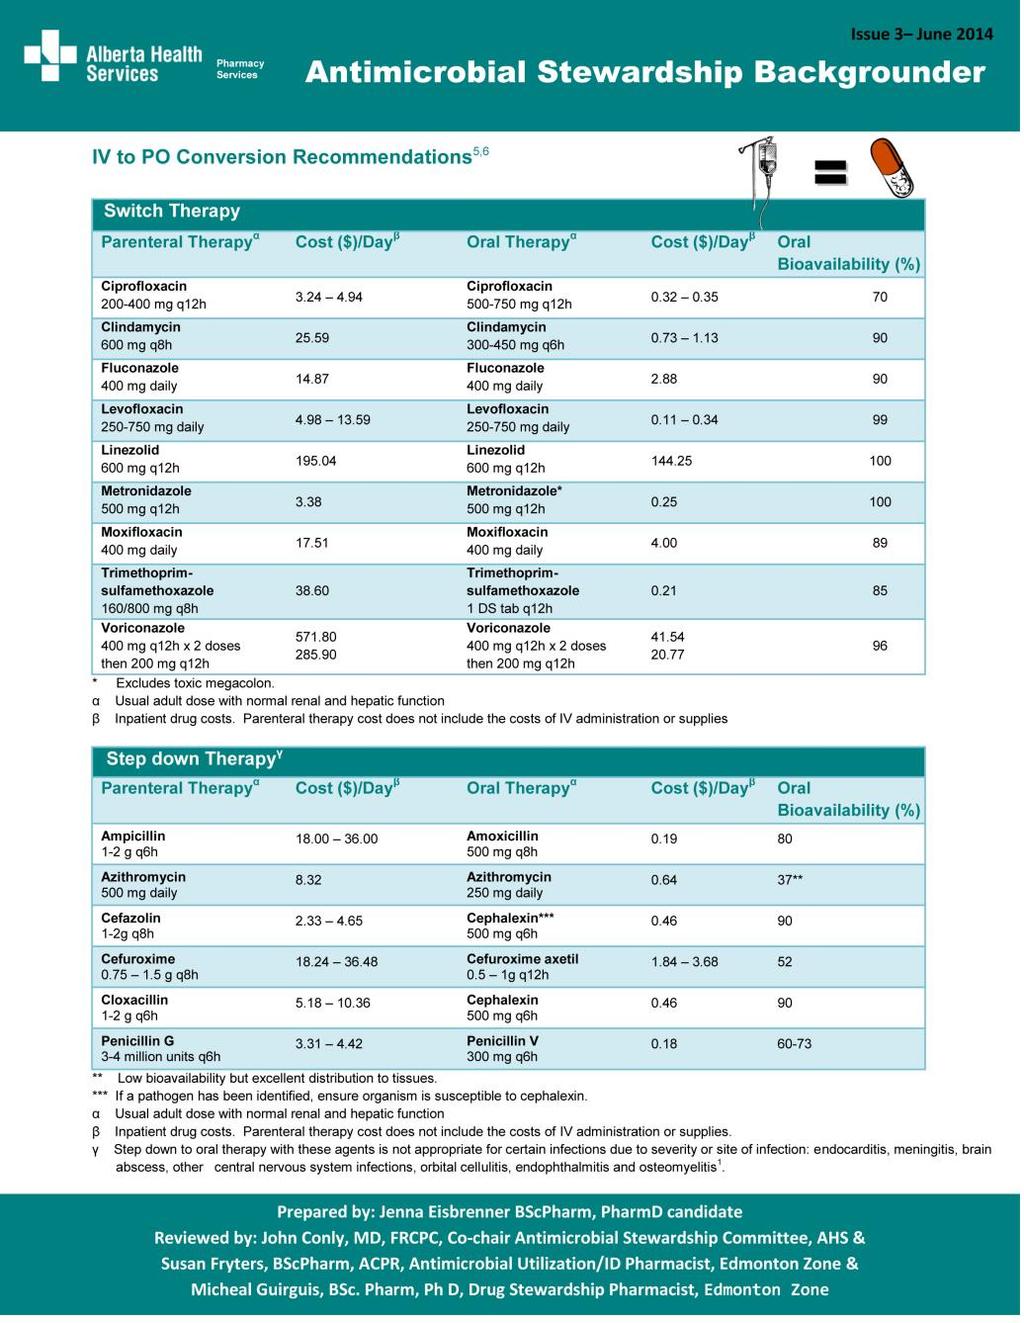 Example 3: Alberta Health Services Antimicrobial Stewardship Backgrounder - Intravenous to Oral Antimicrobial Therapy Conversion (continued) Available online from: http://www.albertahealthservices.